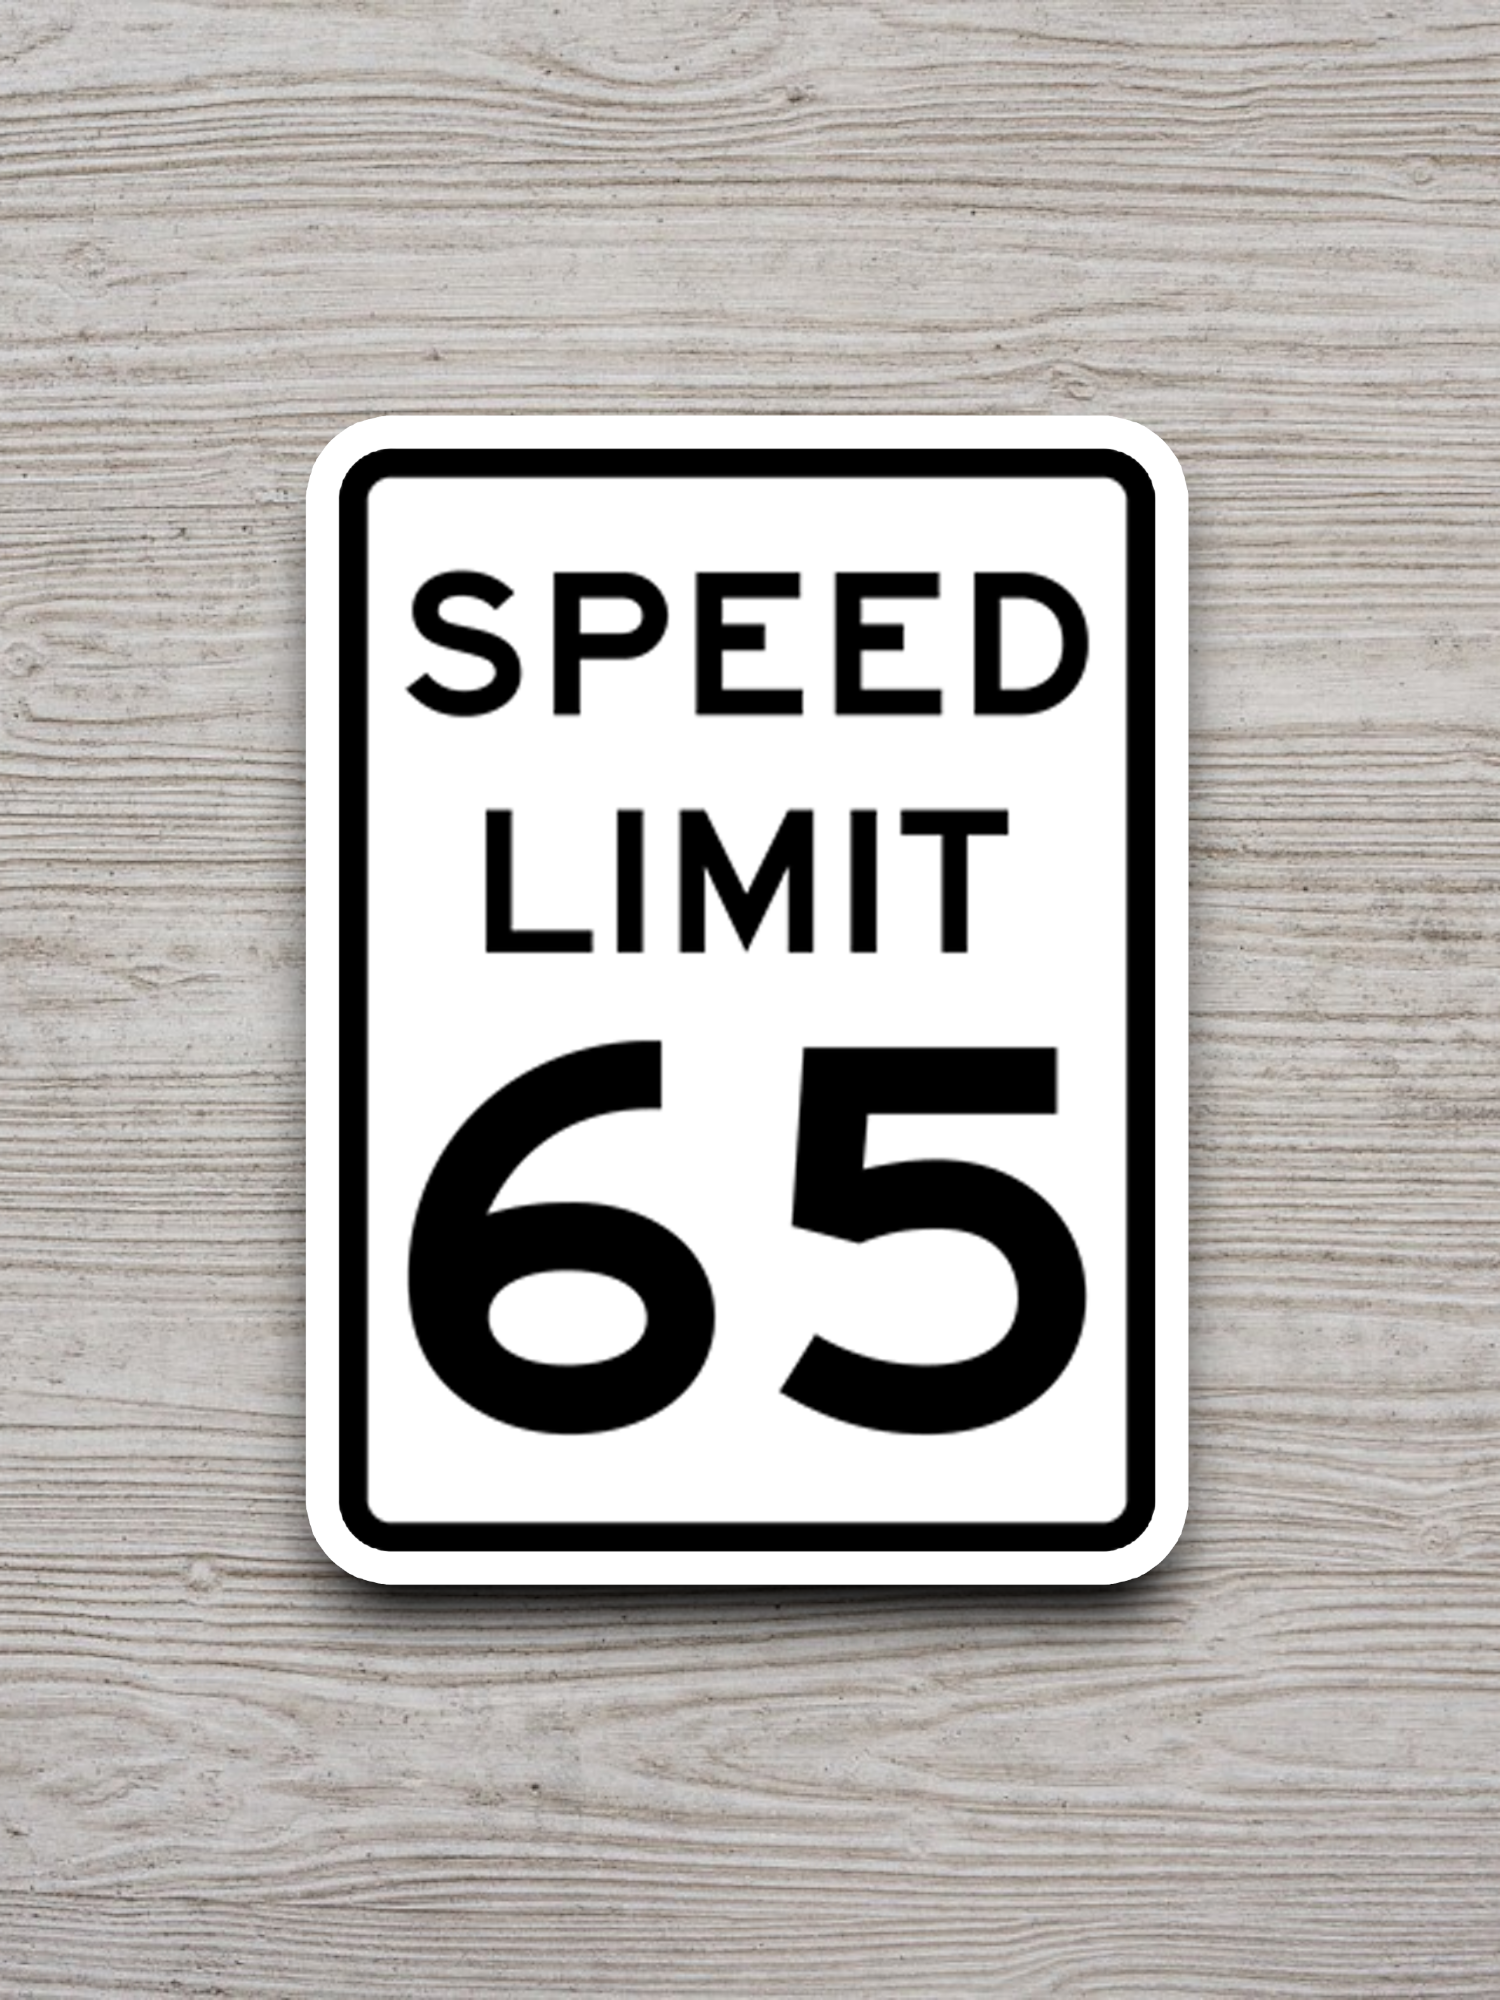 65 Miles Per Hour Speed Limit Road Sign Sticker